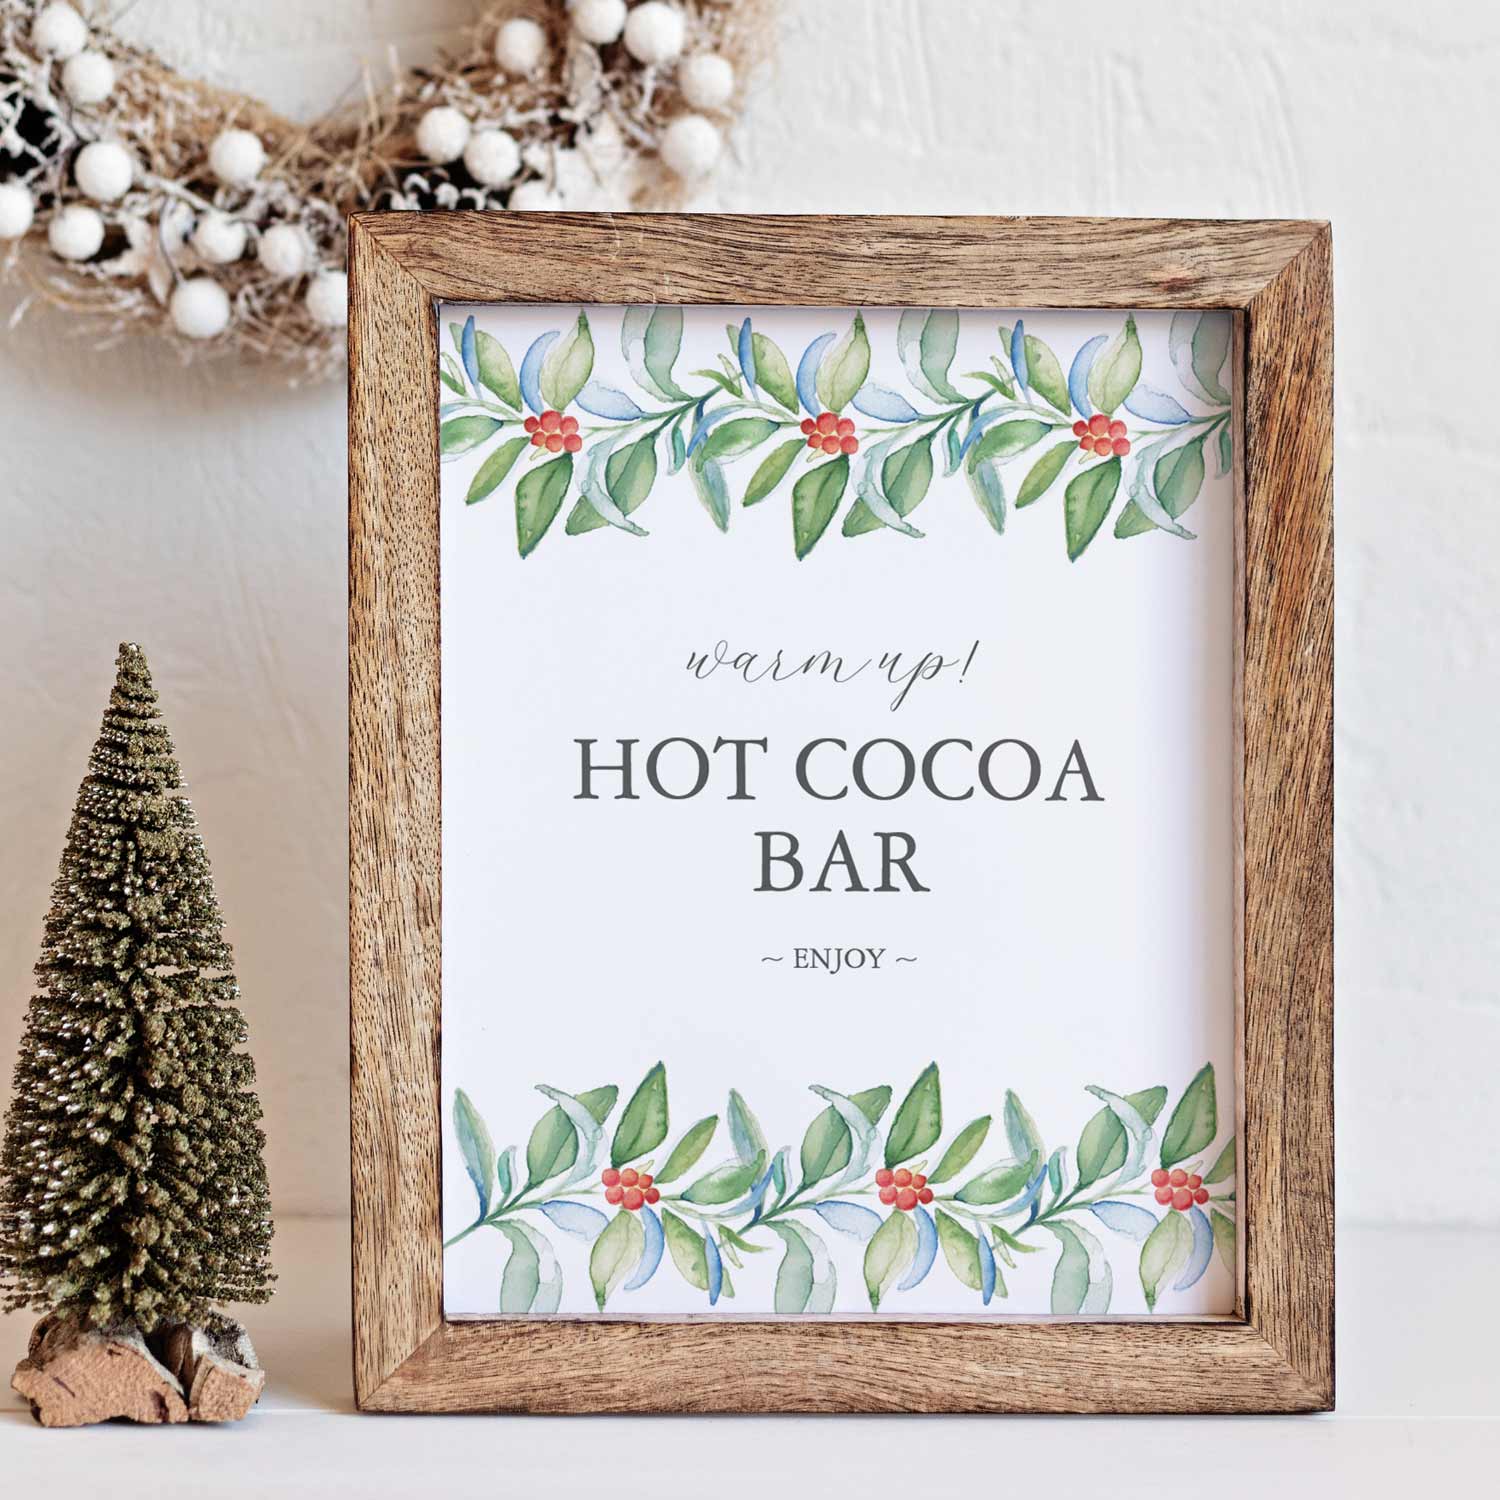 hot cocoa bar sign features unique watercolor art by Victoria Grigaliunas of Do Tell A Belle